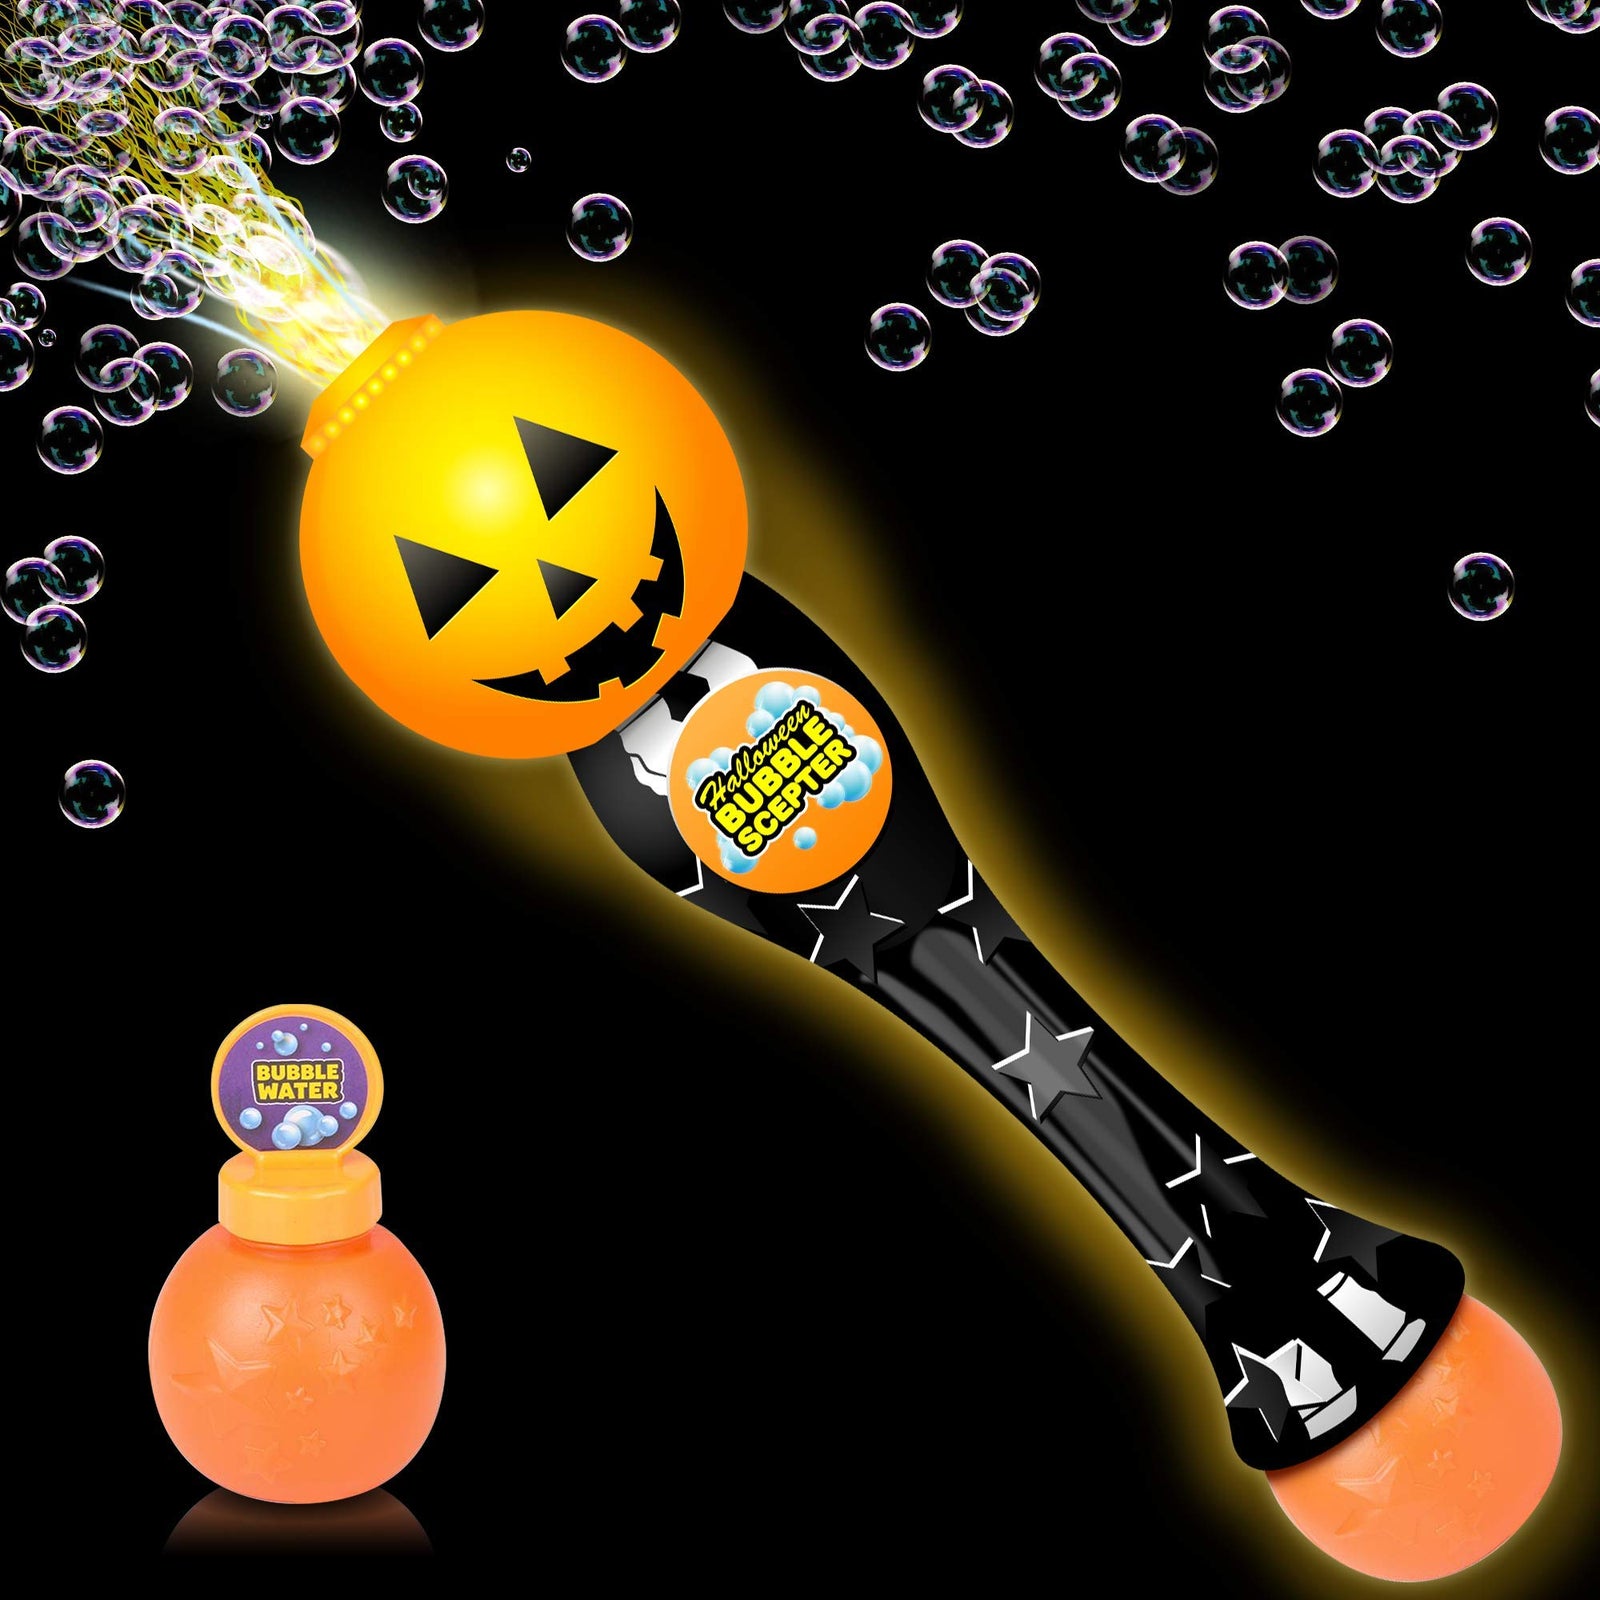 ArtCreativity Light Up Halloween Bubble Blower Wand - 13.5 Inch Illuminating Bubble Blower Wand with Thrilling LED Effect for Kids, Bubble Fluid - Batteries Included - Gift Idea, Halloween Party Favor